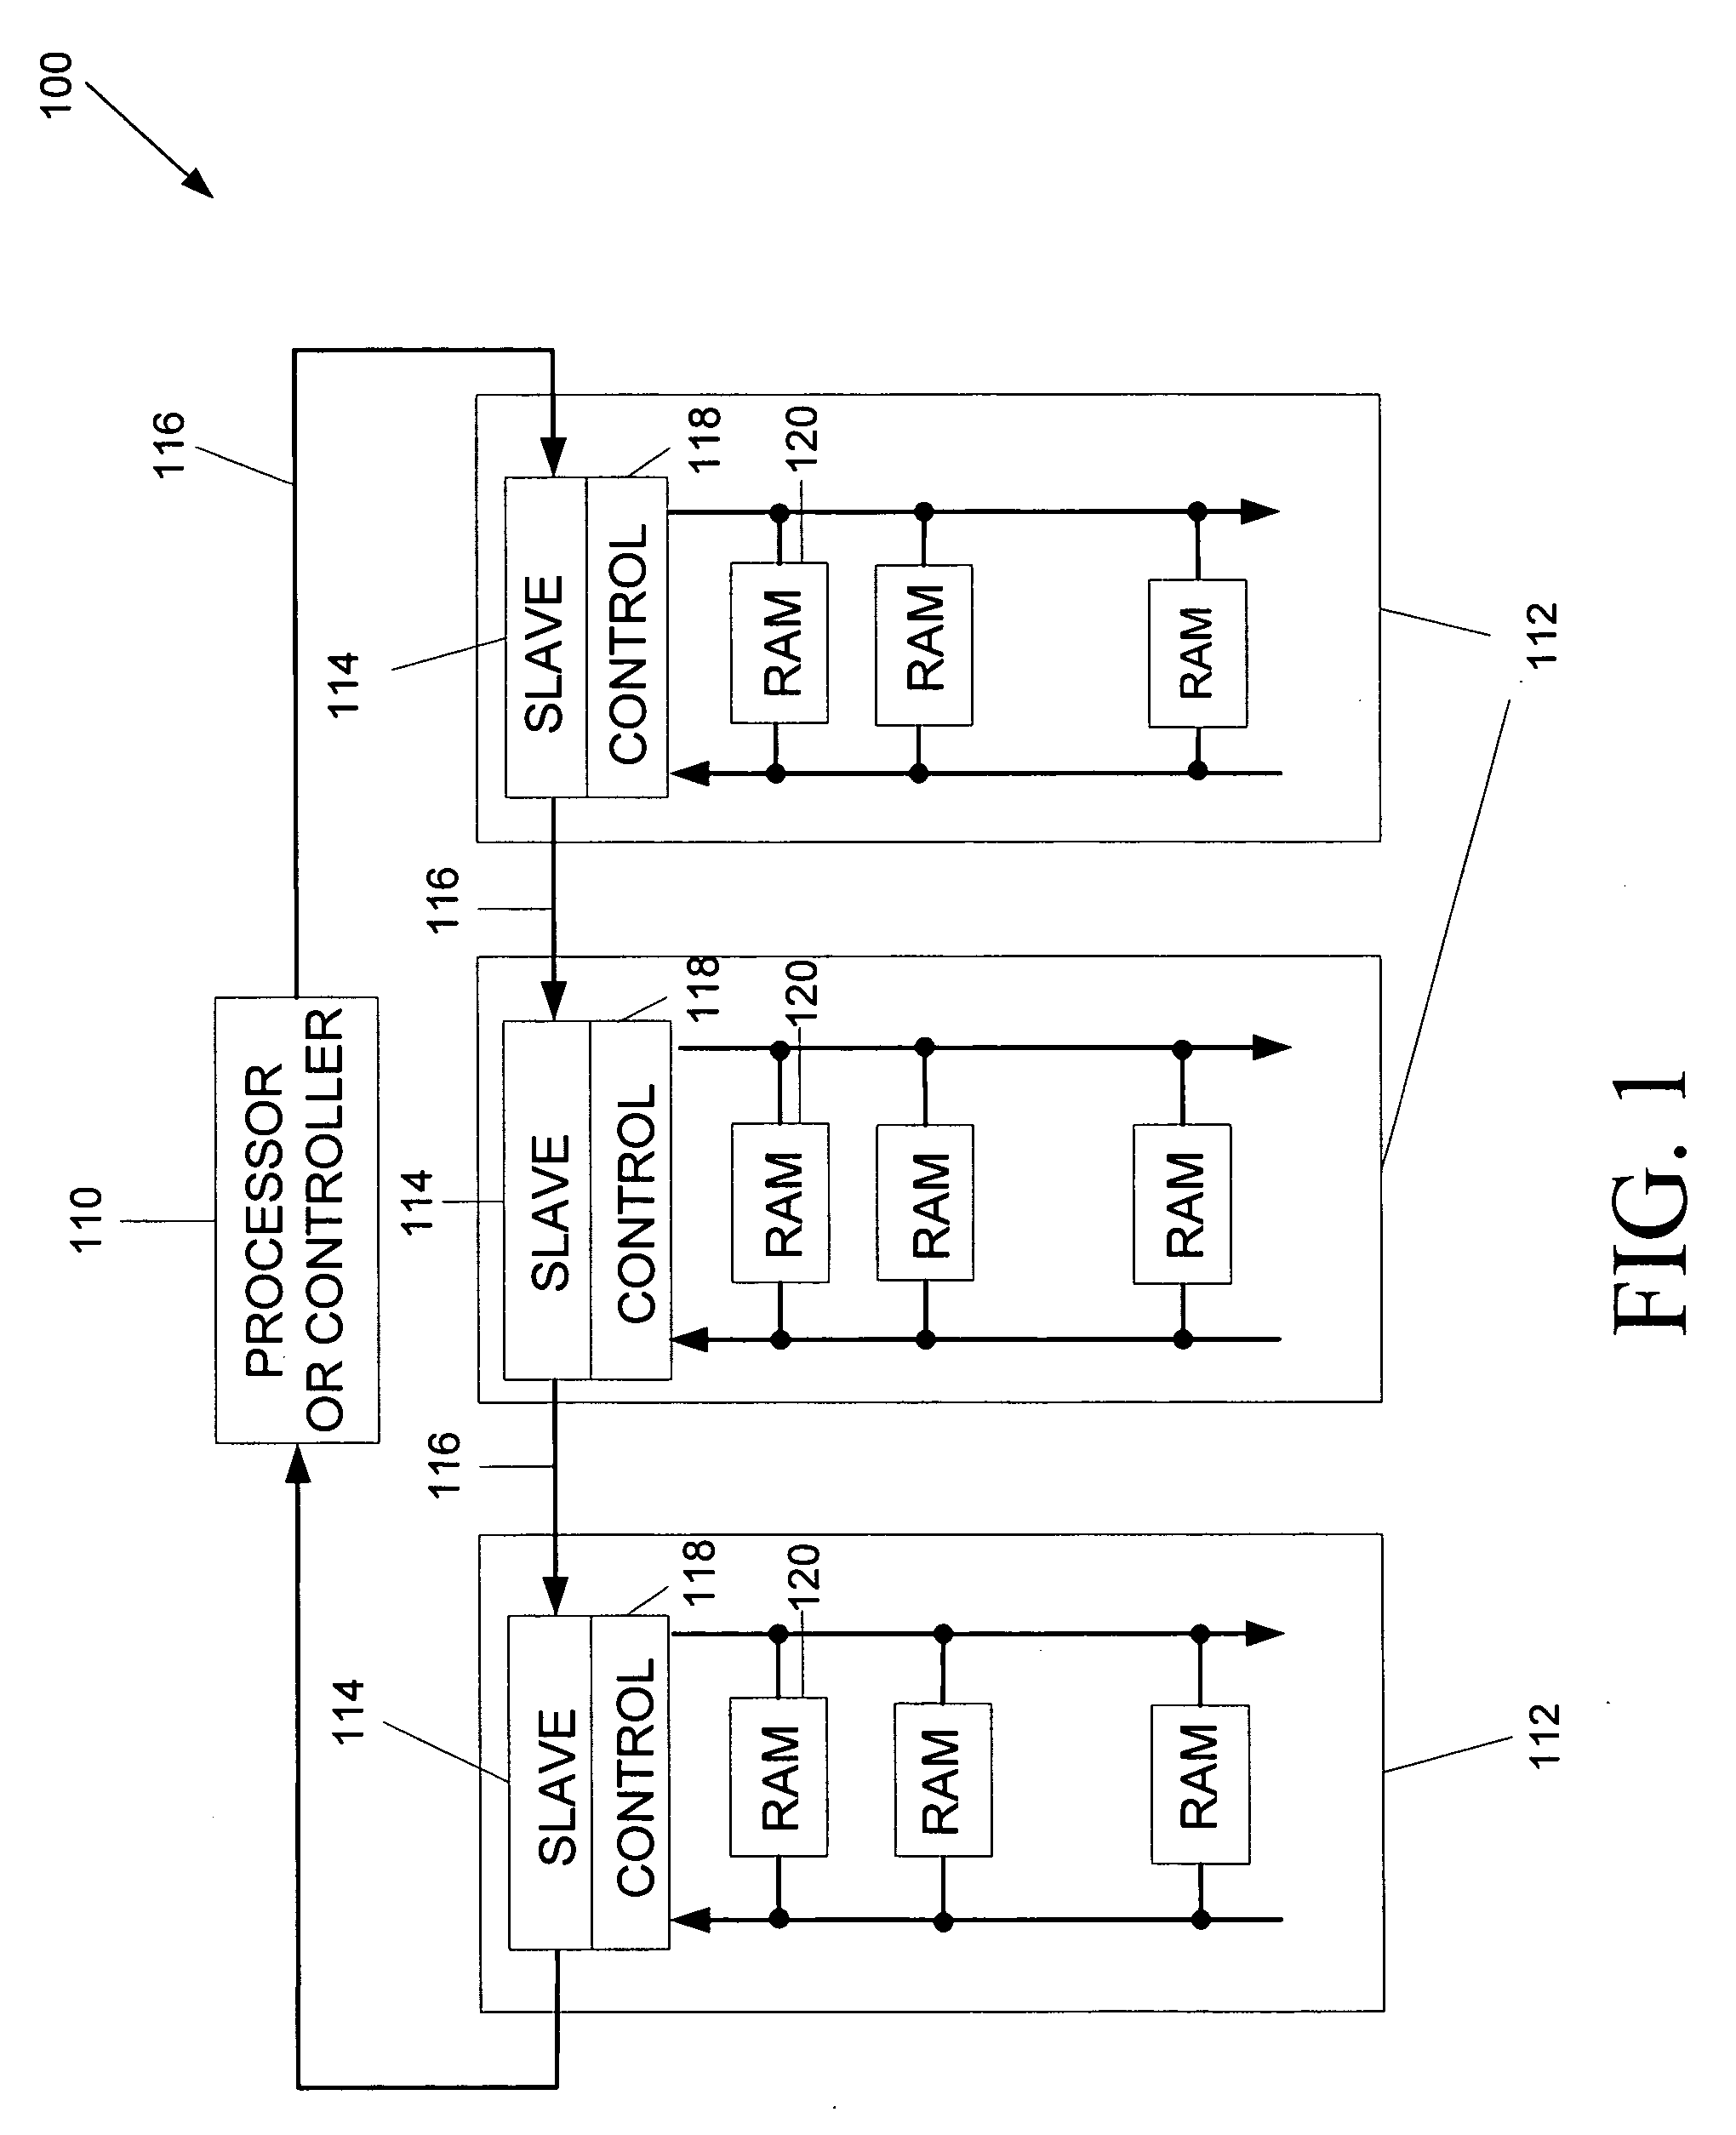 Memory controller transaction scheduling algorithm using variable and uniform latency